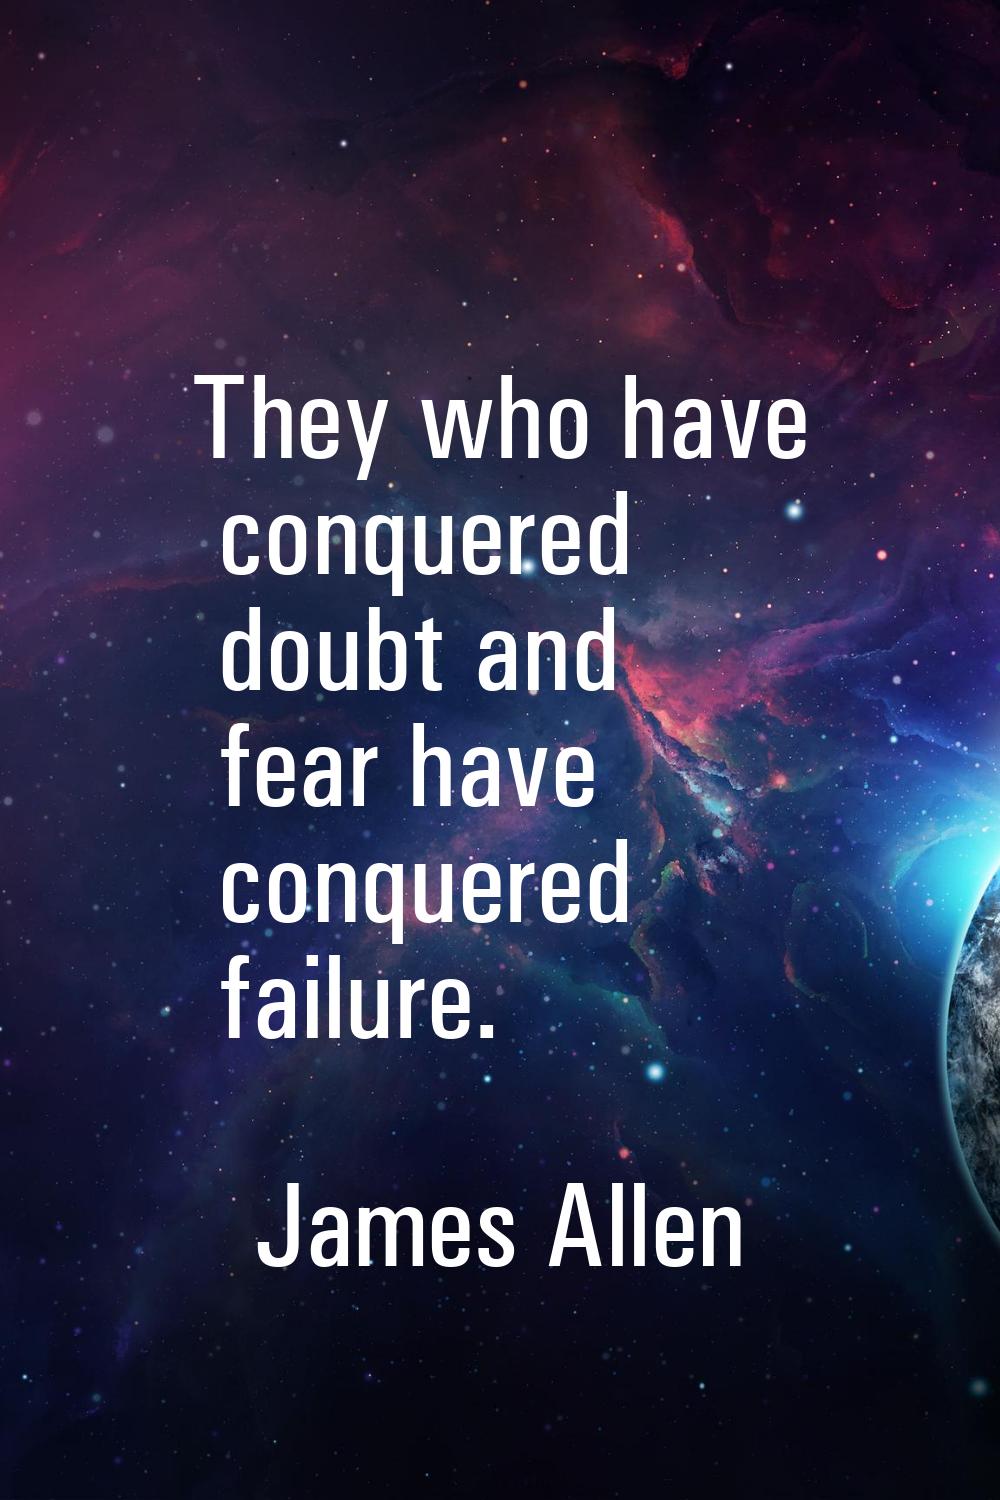 They who have conquered doubt and fear have conquered failure.